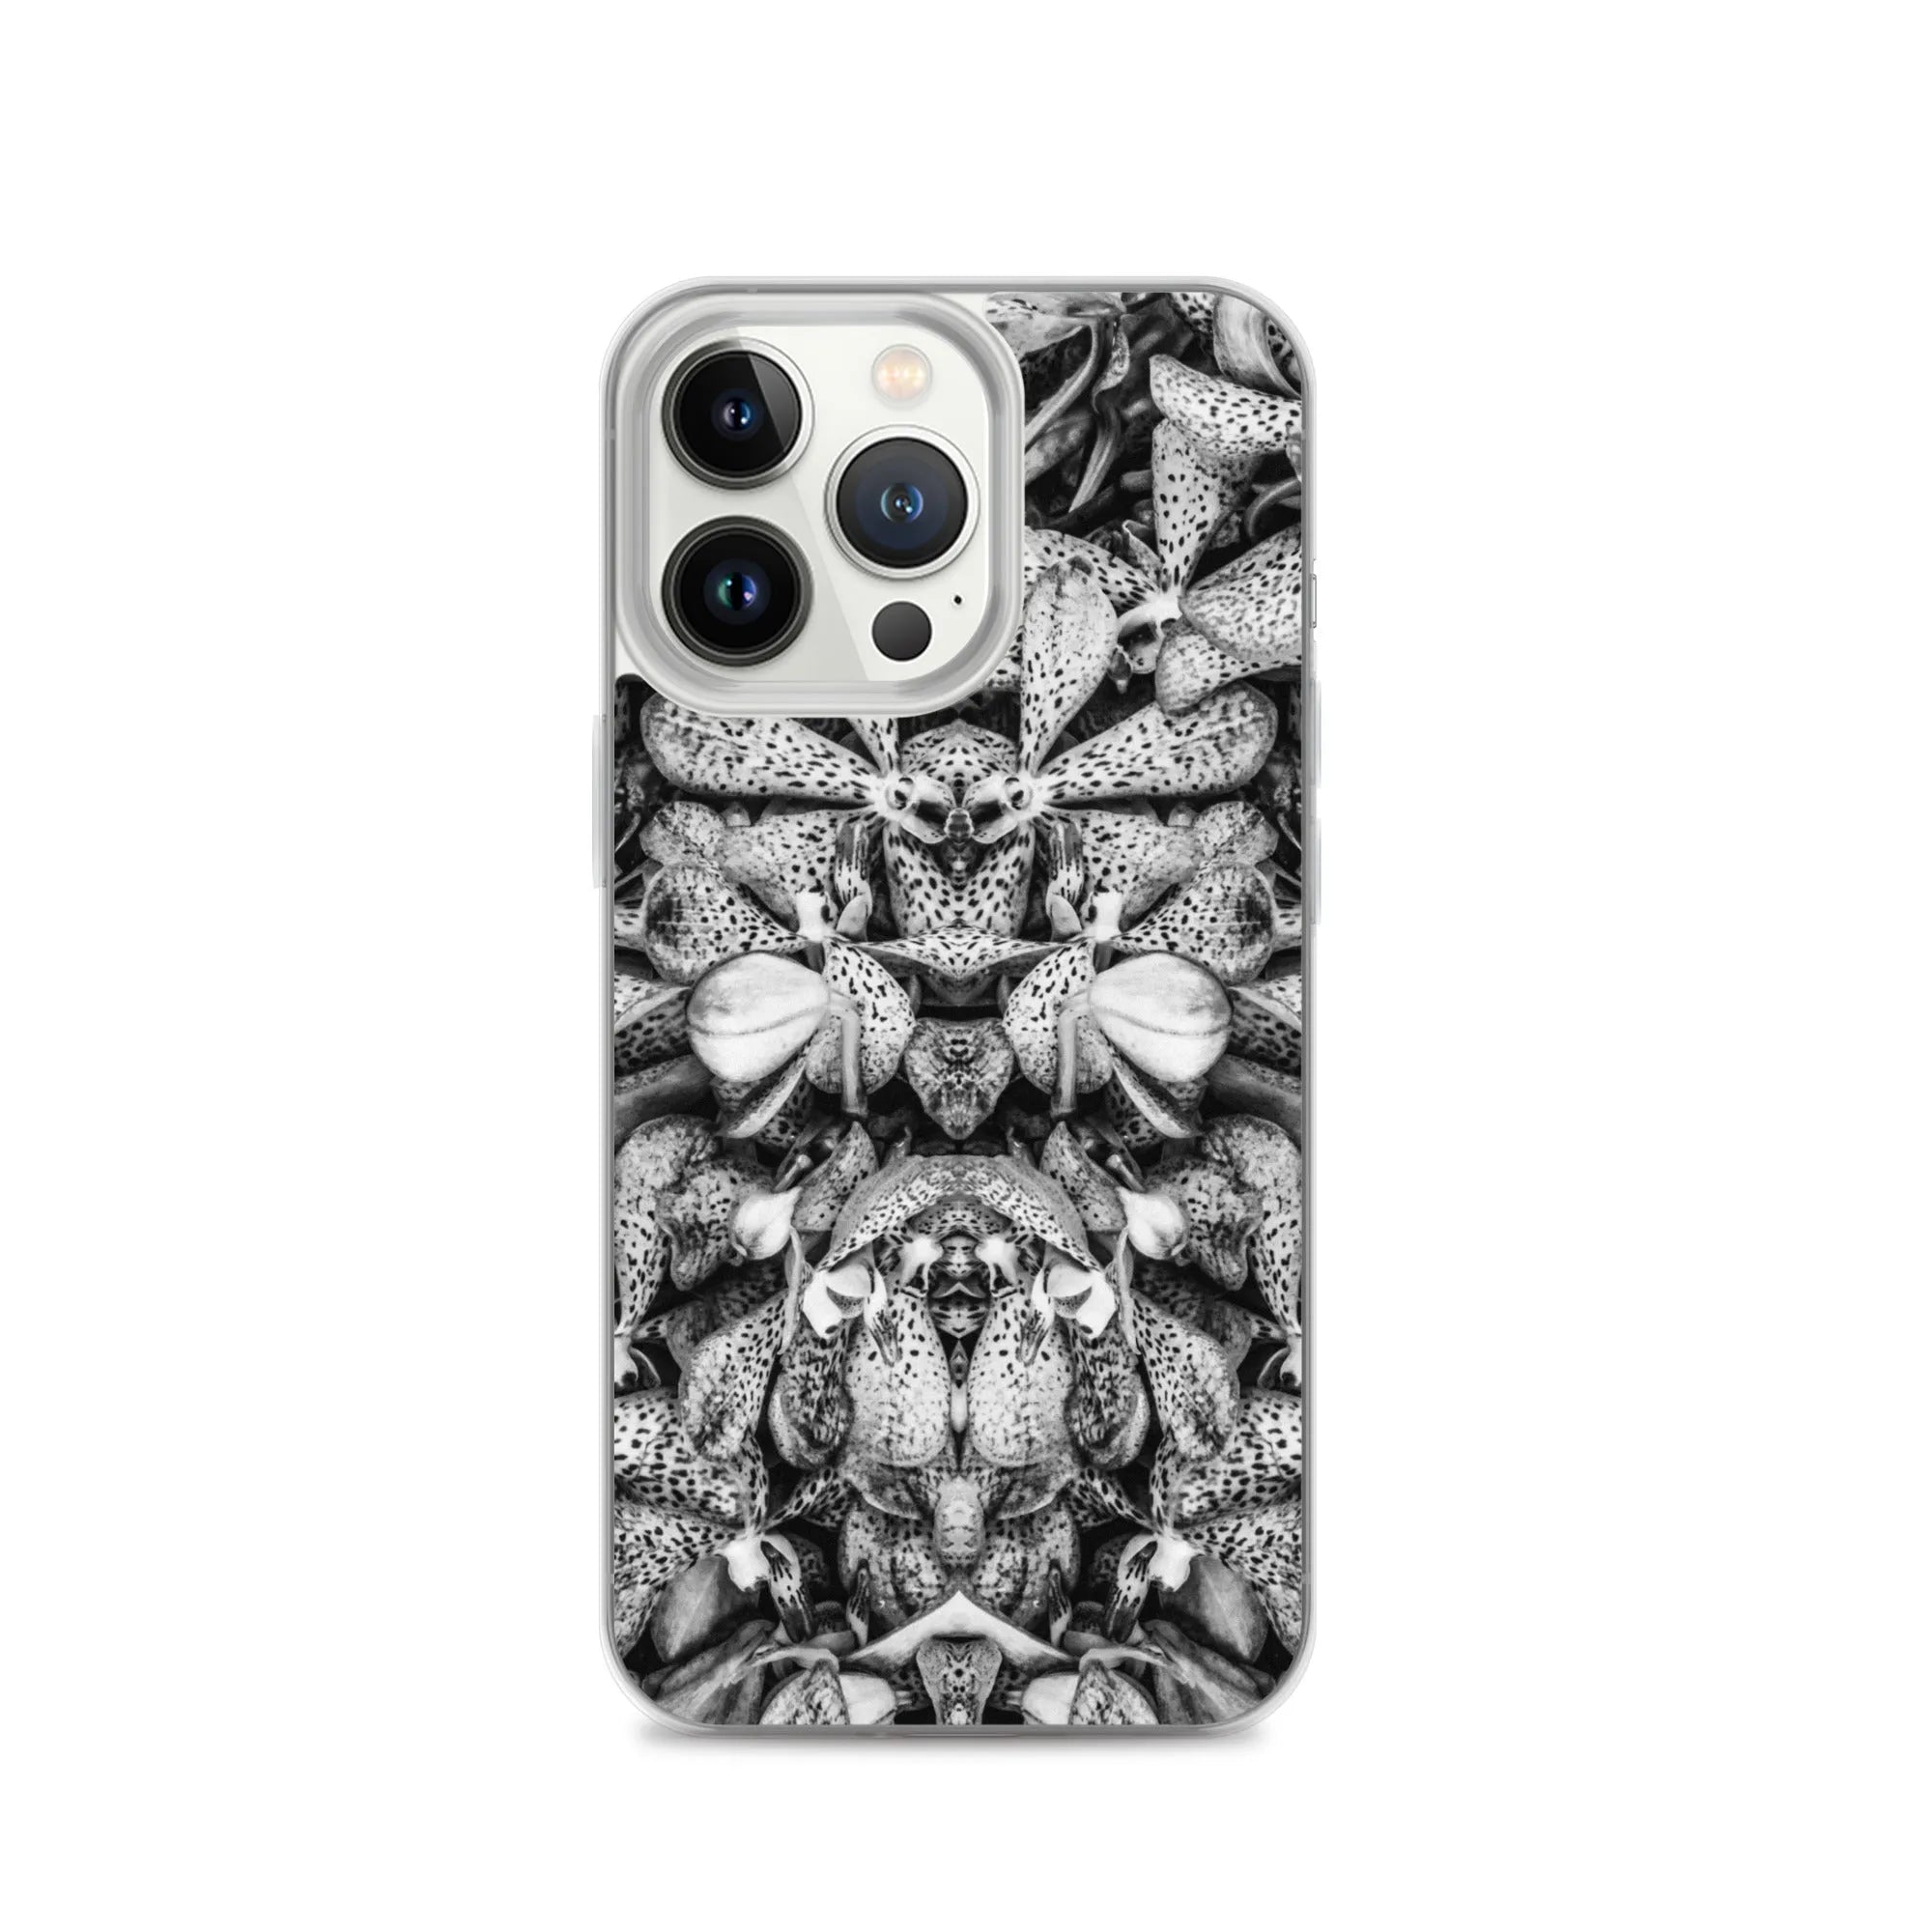 Tickled Pink² Floral Iphone Case - Black And White - Iphone 13 Pro - Mobile Phone Cases - Aesthetic Art